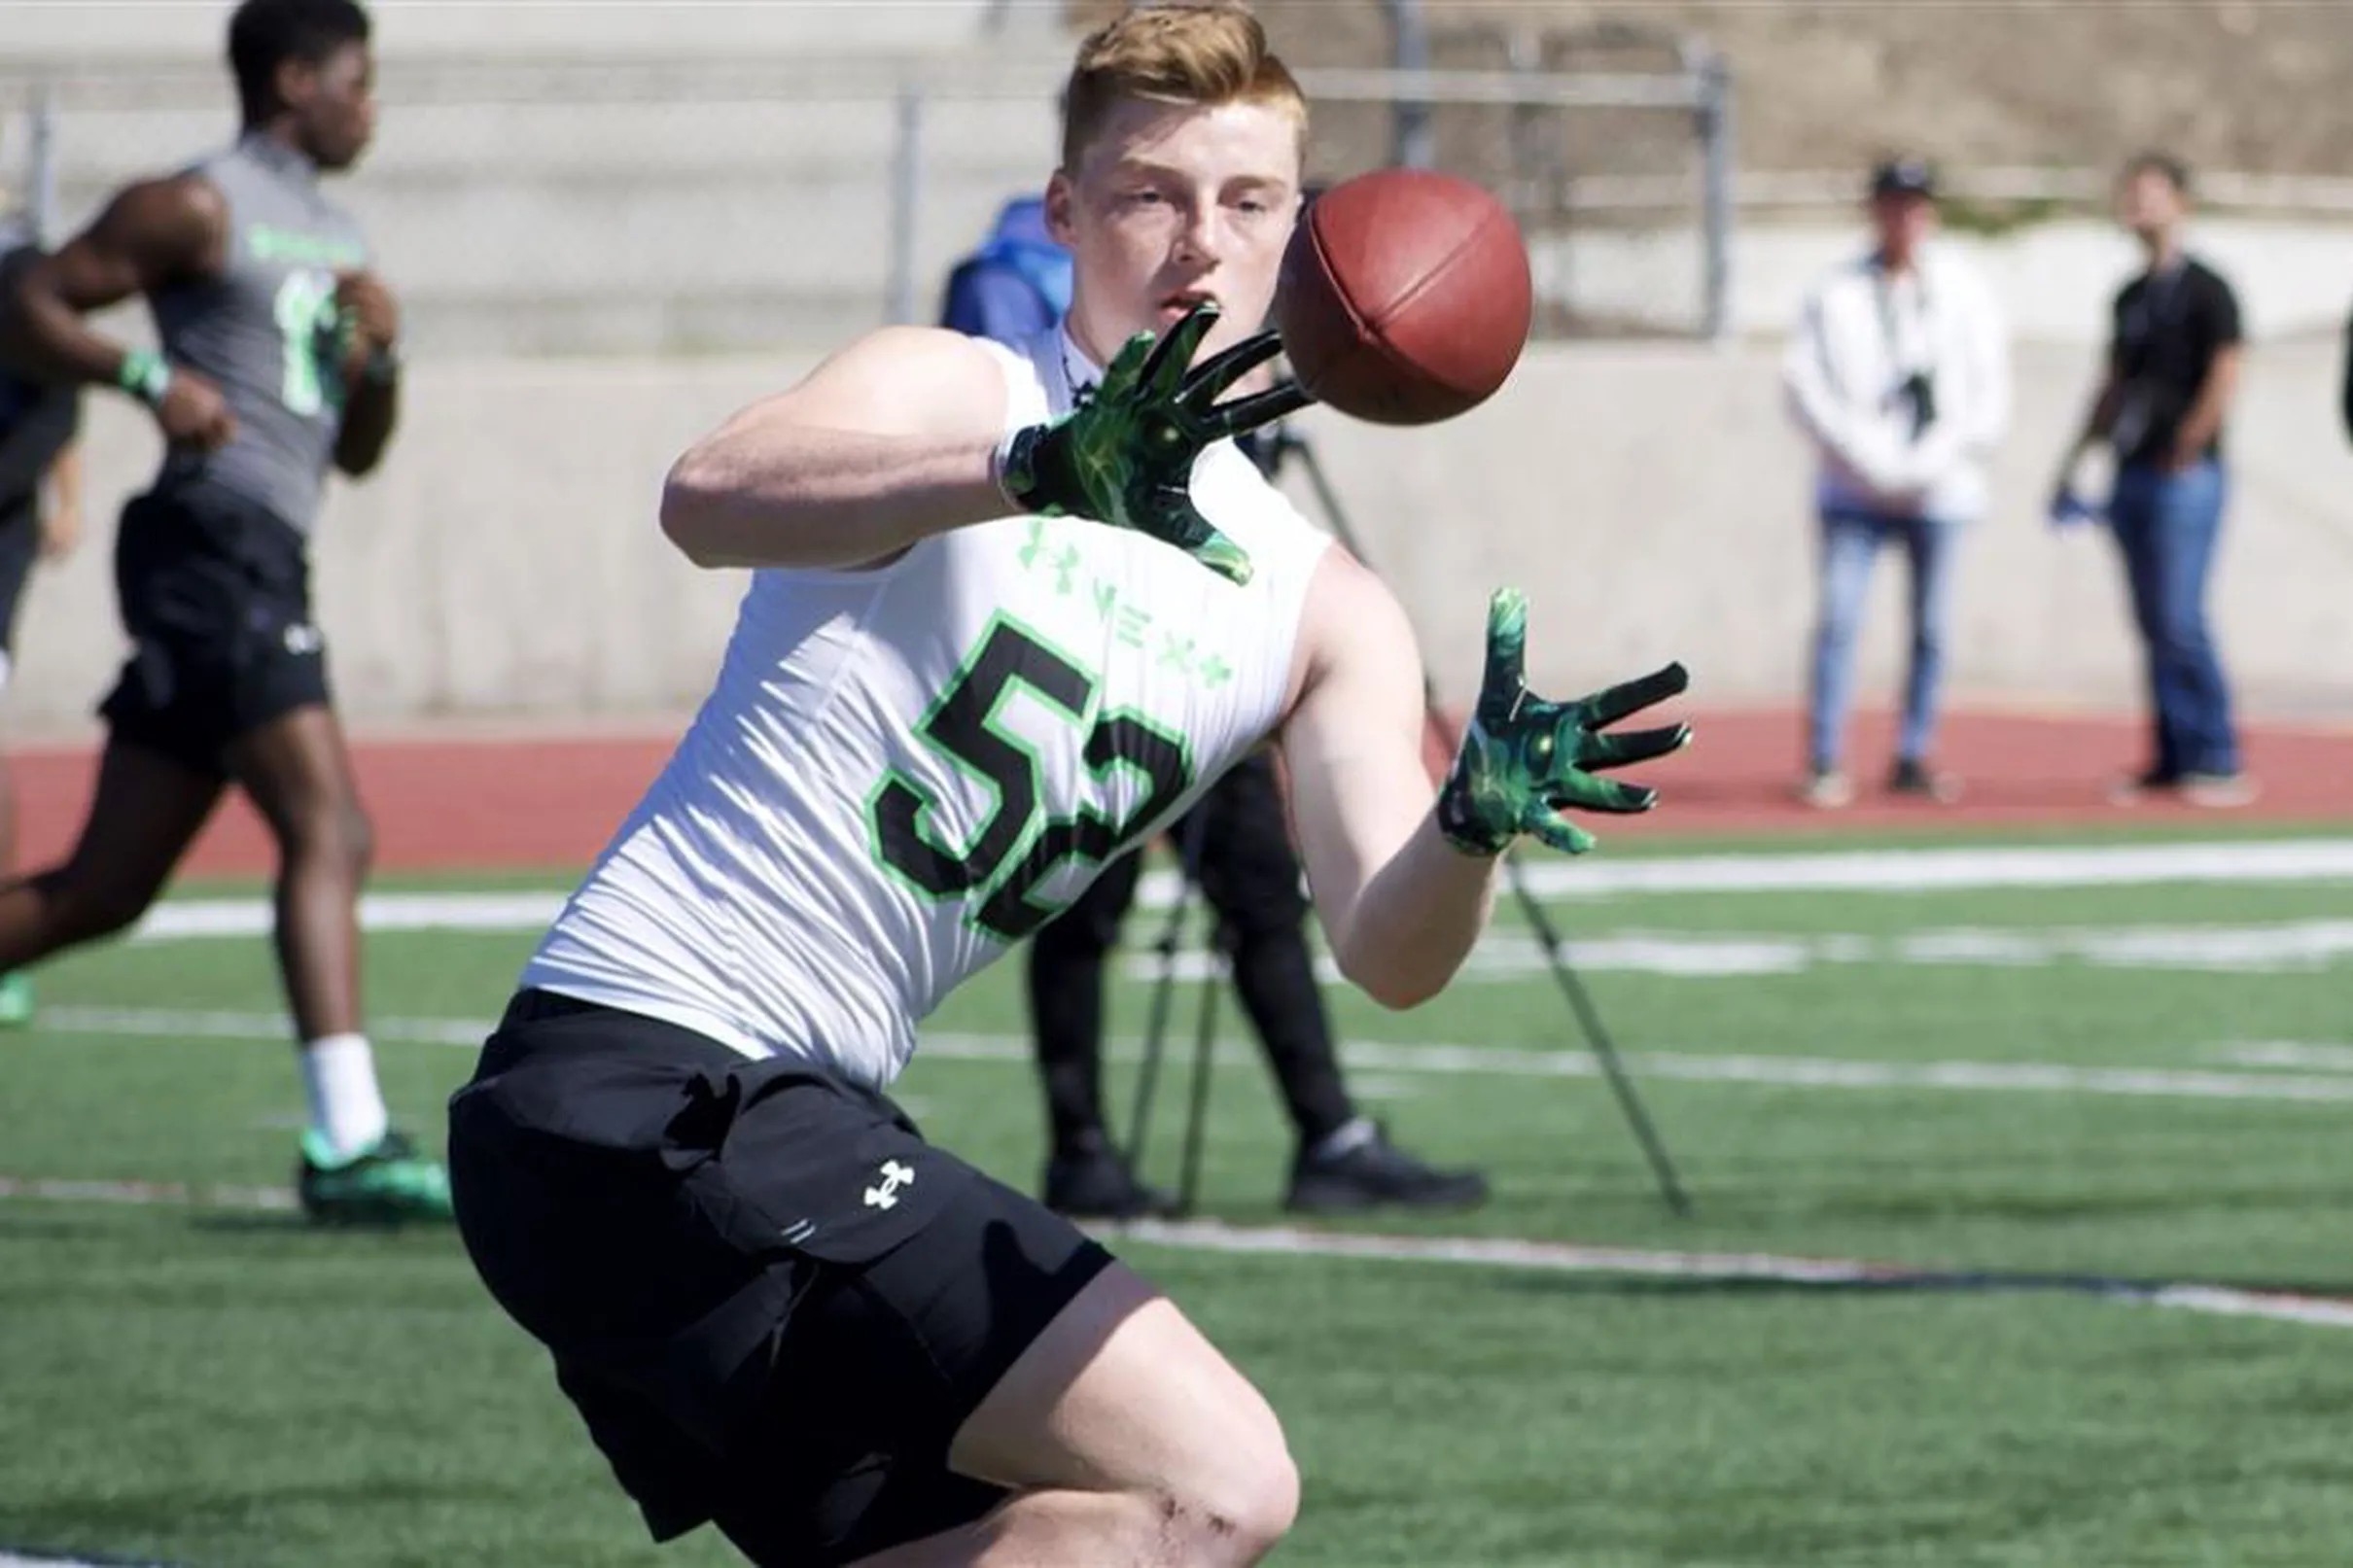 2025 tight end set to visit for Notre Dame game, rumors surrounding an